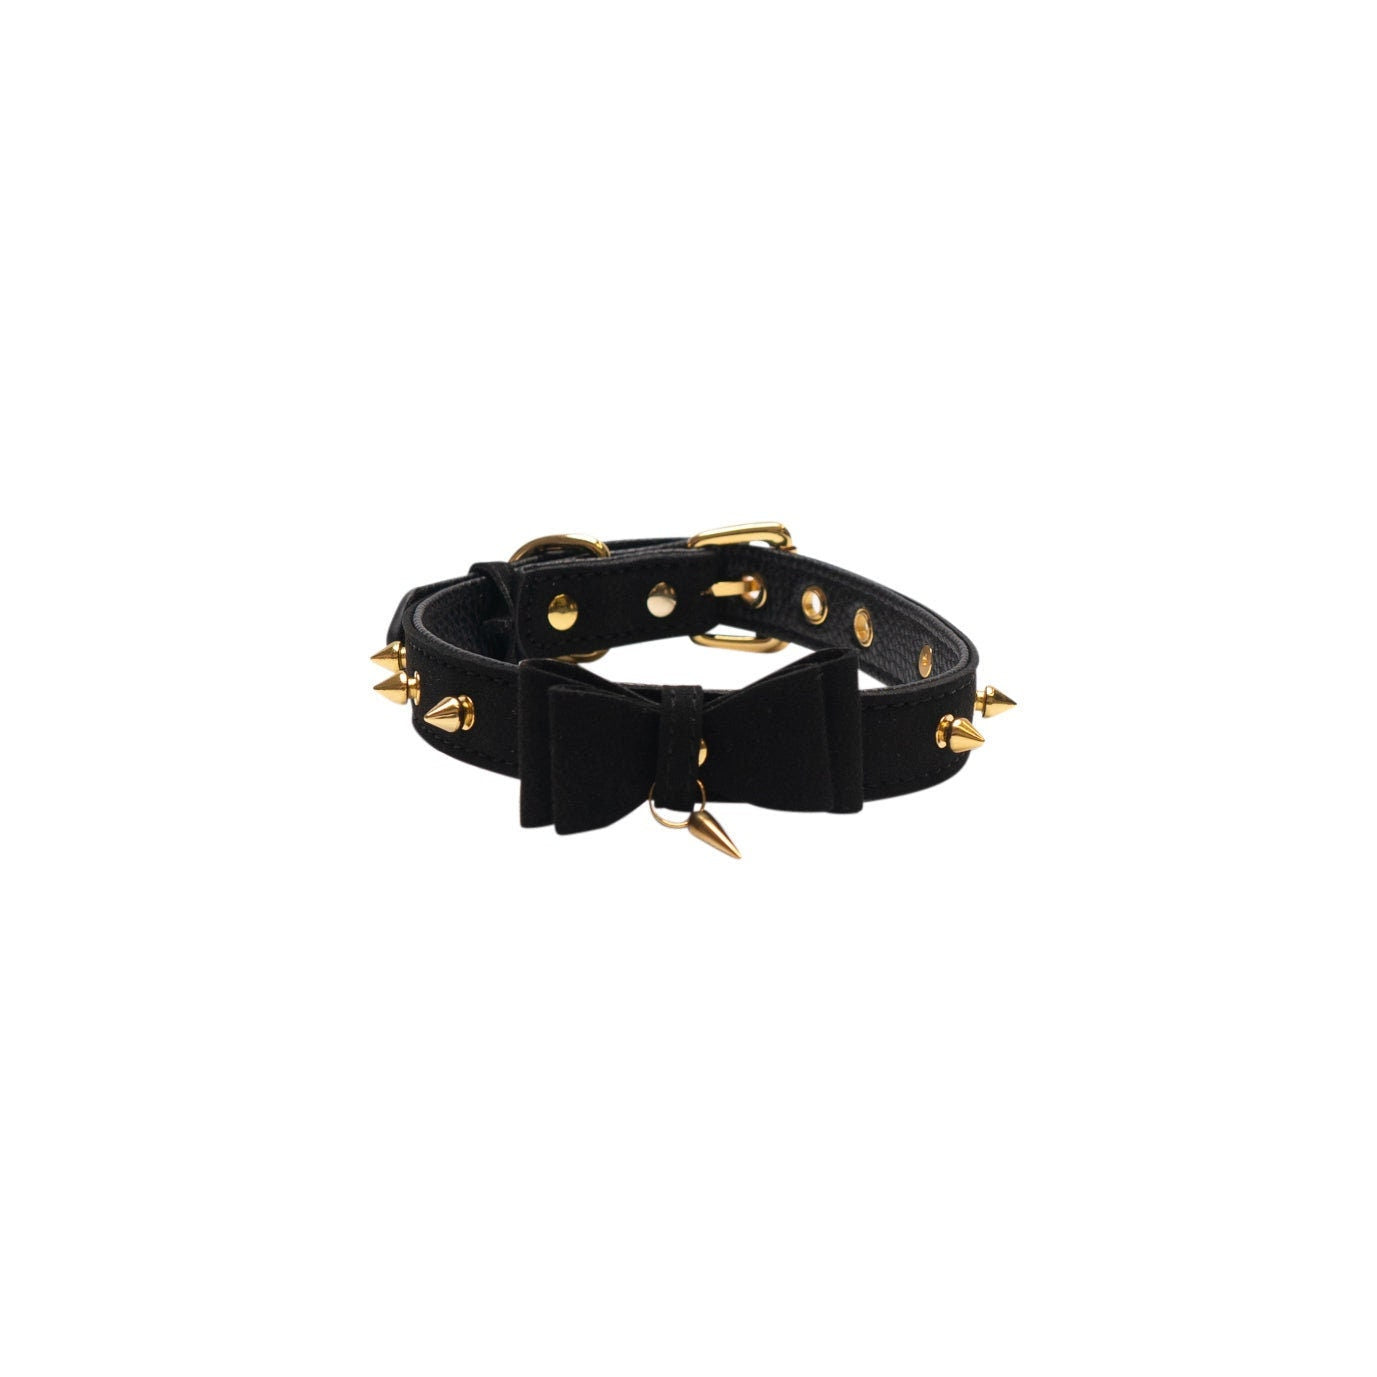 Black and Gold Sexy Bdsm Collar - Gold Spikes Choker